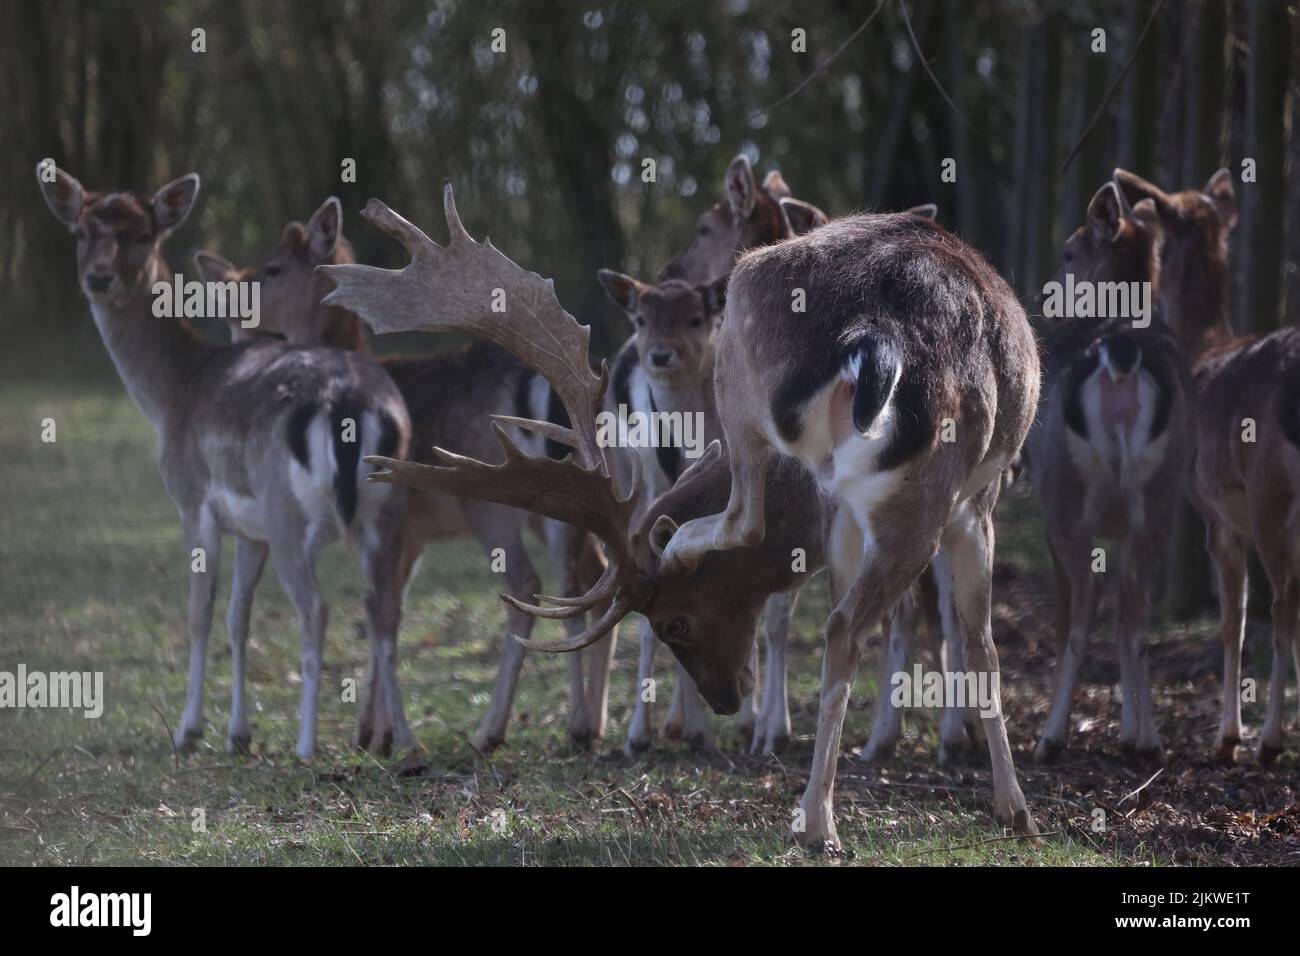 Deer at the edge of the forest. Stock Photo